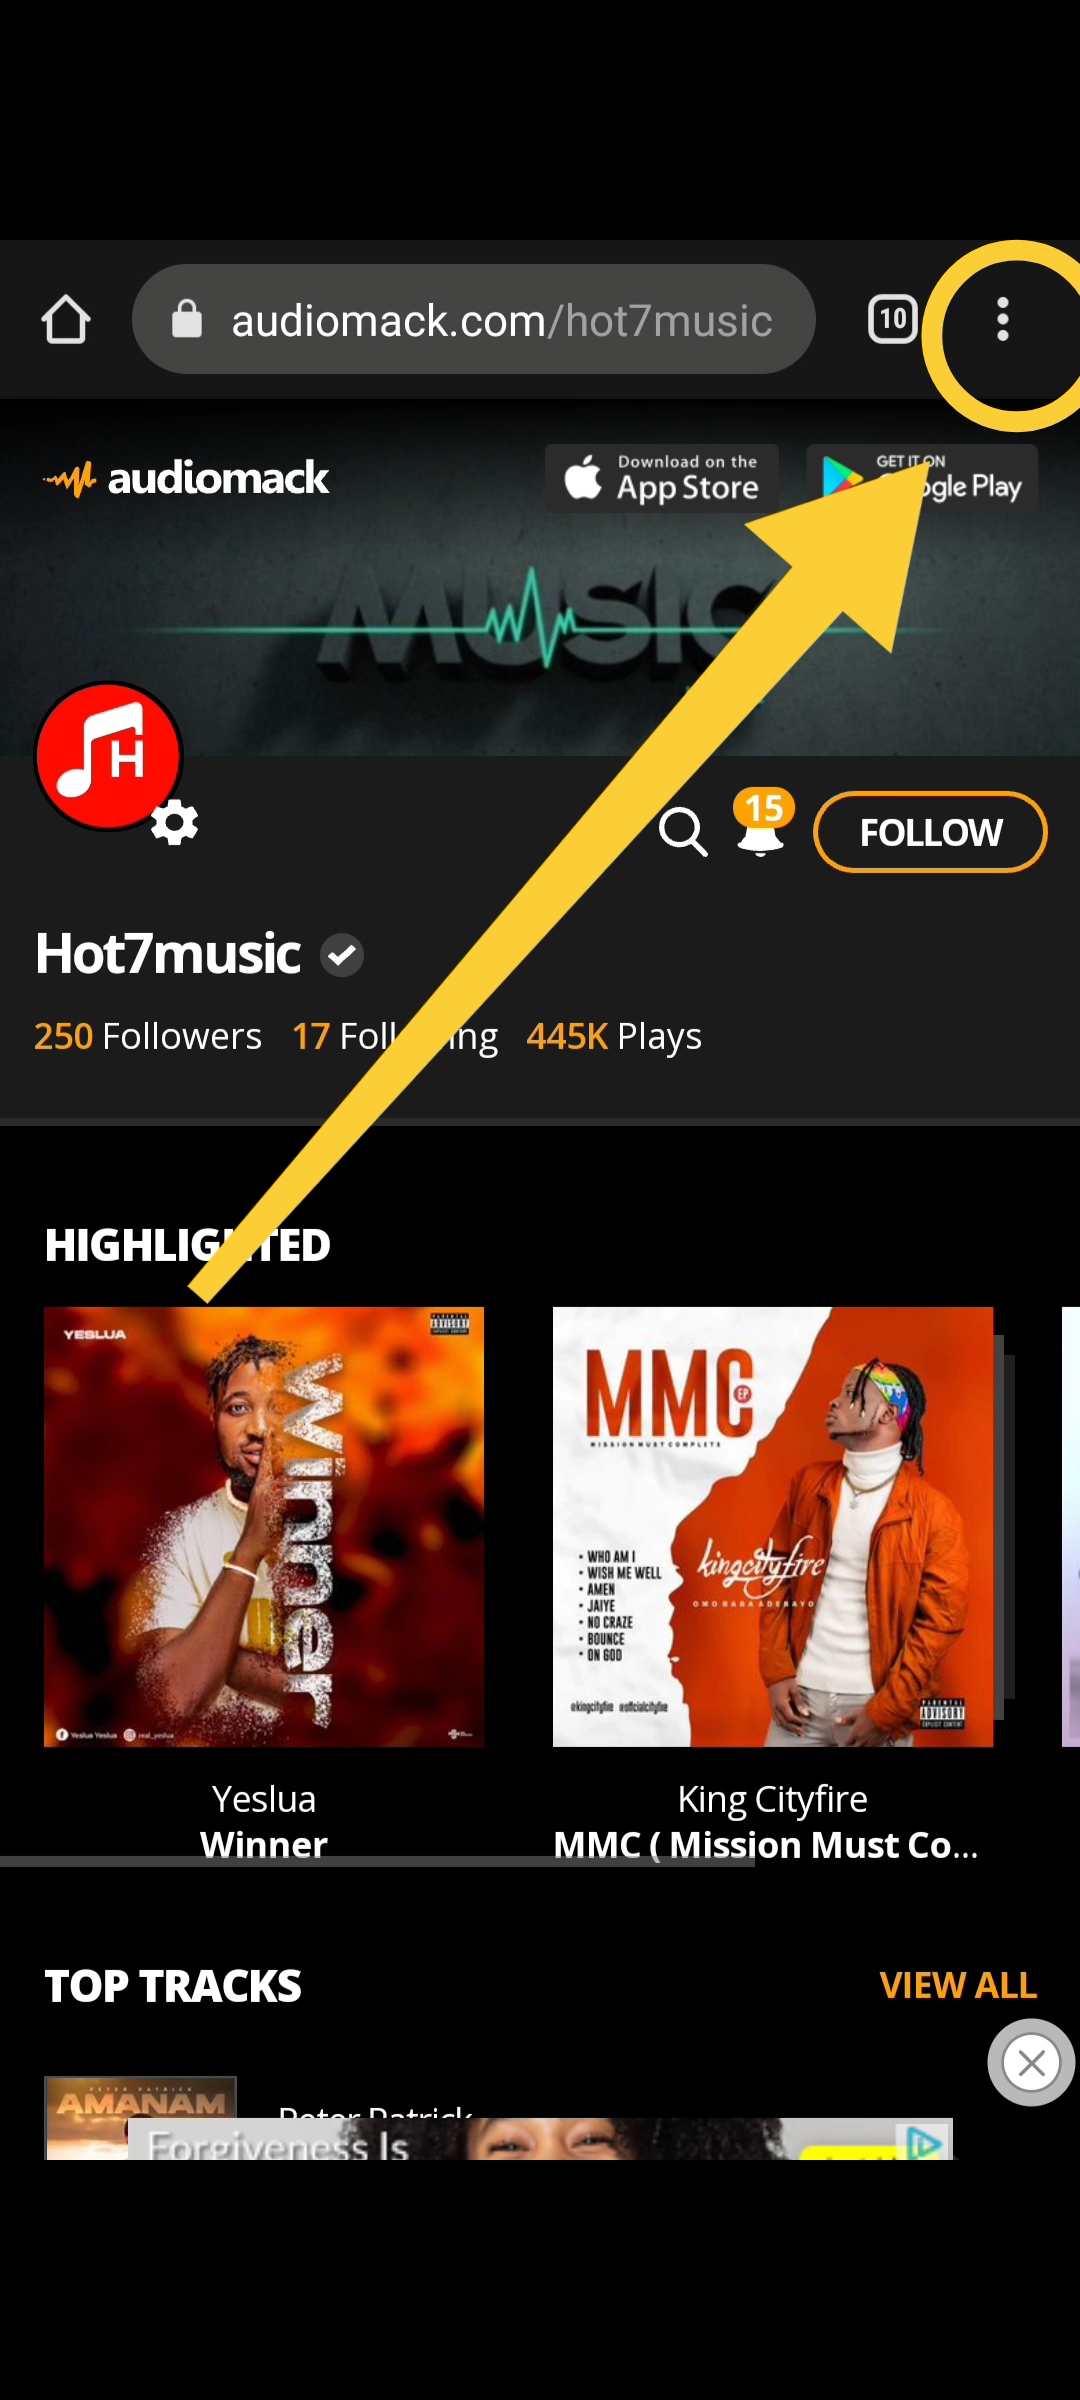 How To Upload Music On Audiomack Using Android Phone